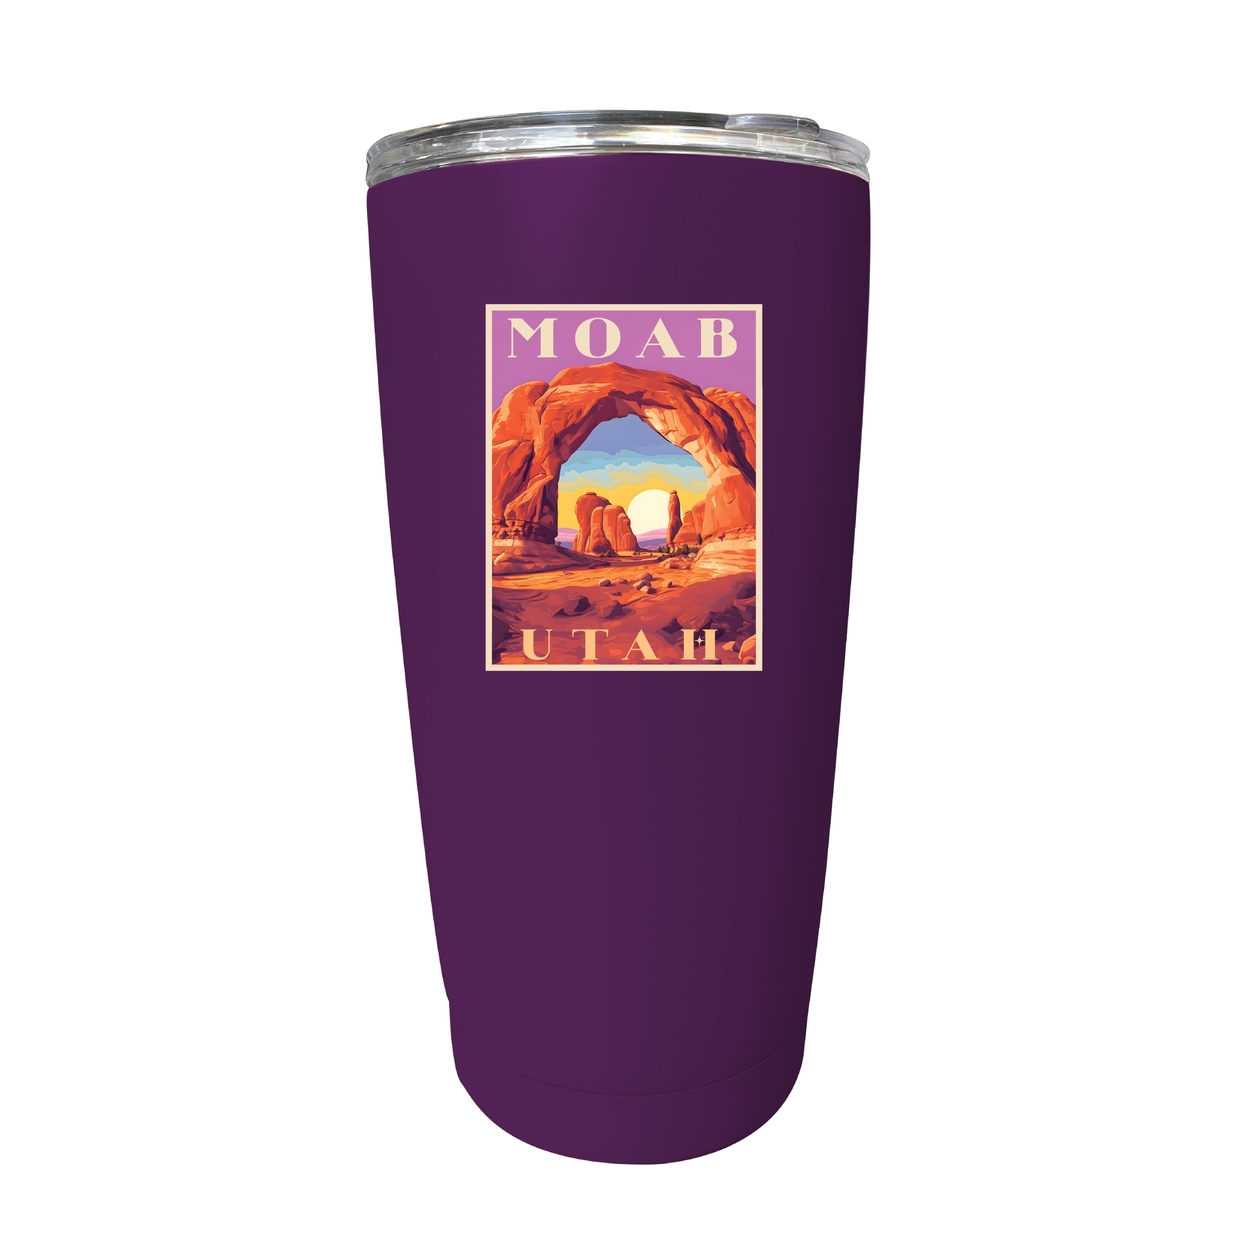 Moab Utah Souvenir 16 Oz Stainless Steel Insulated Tumbler - Red,,4-Pack